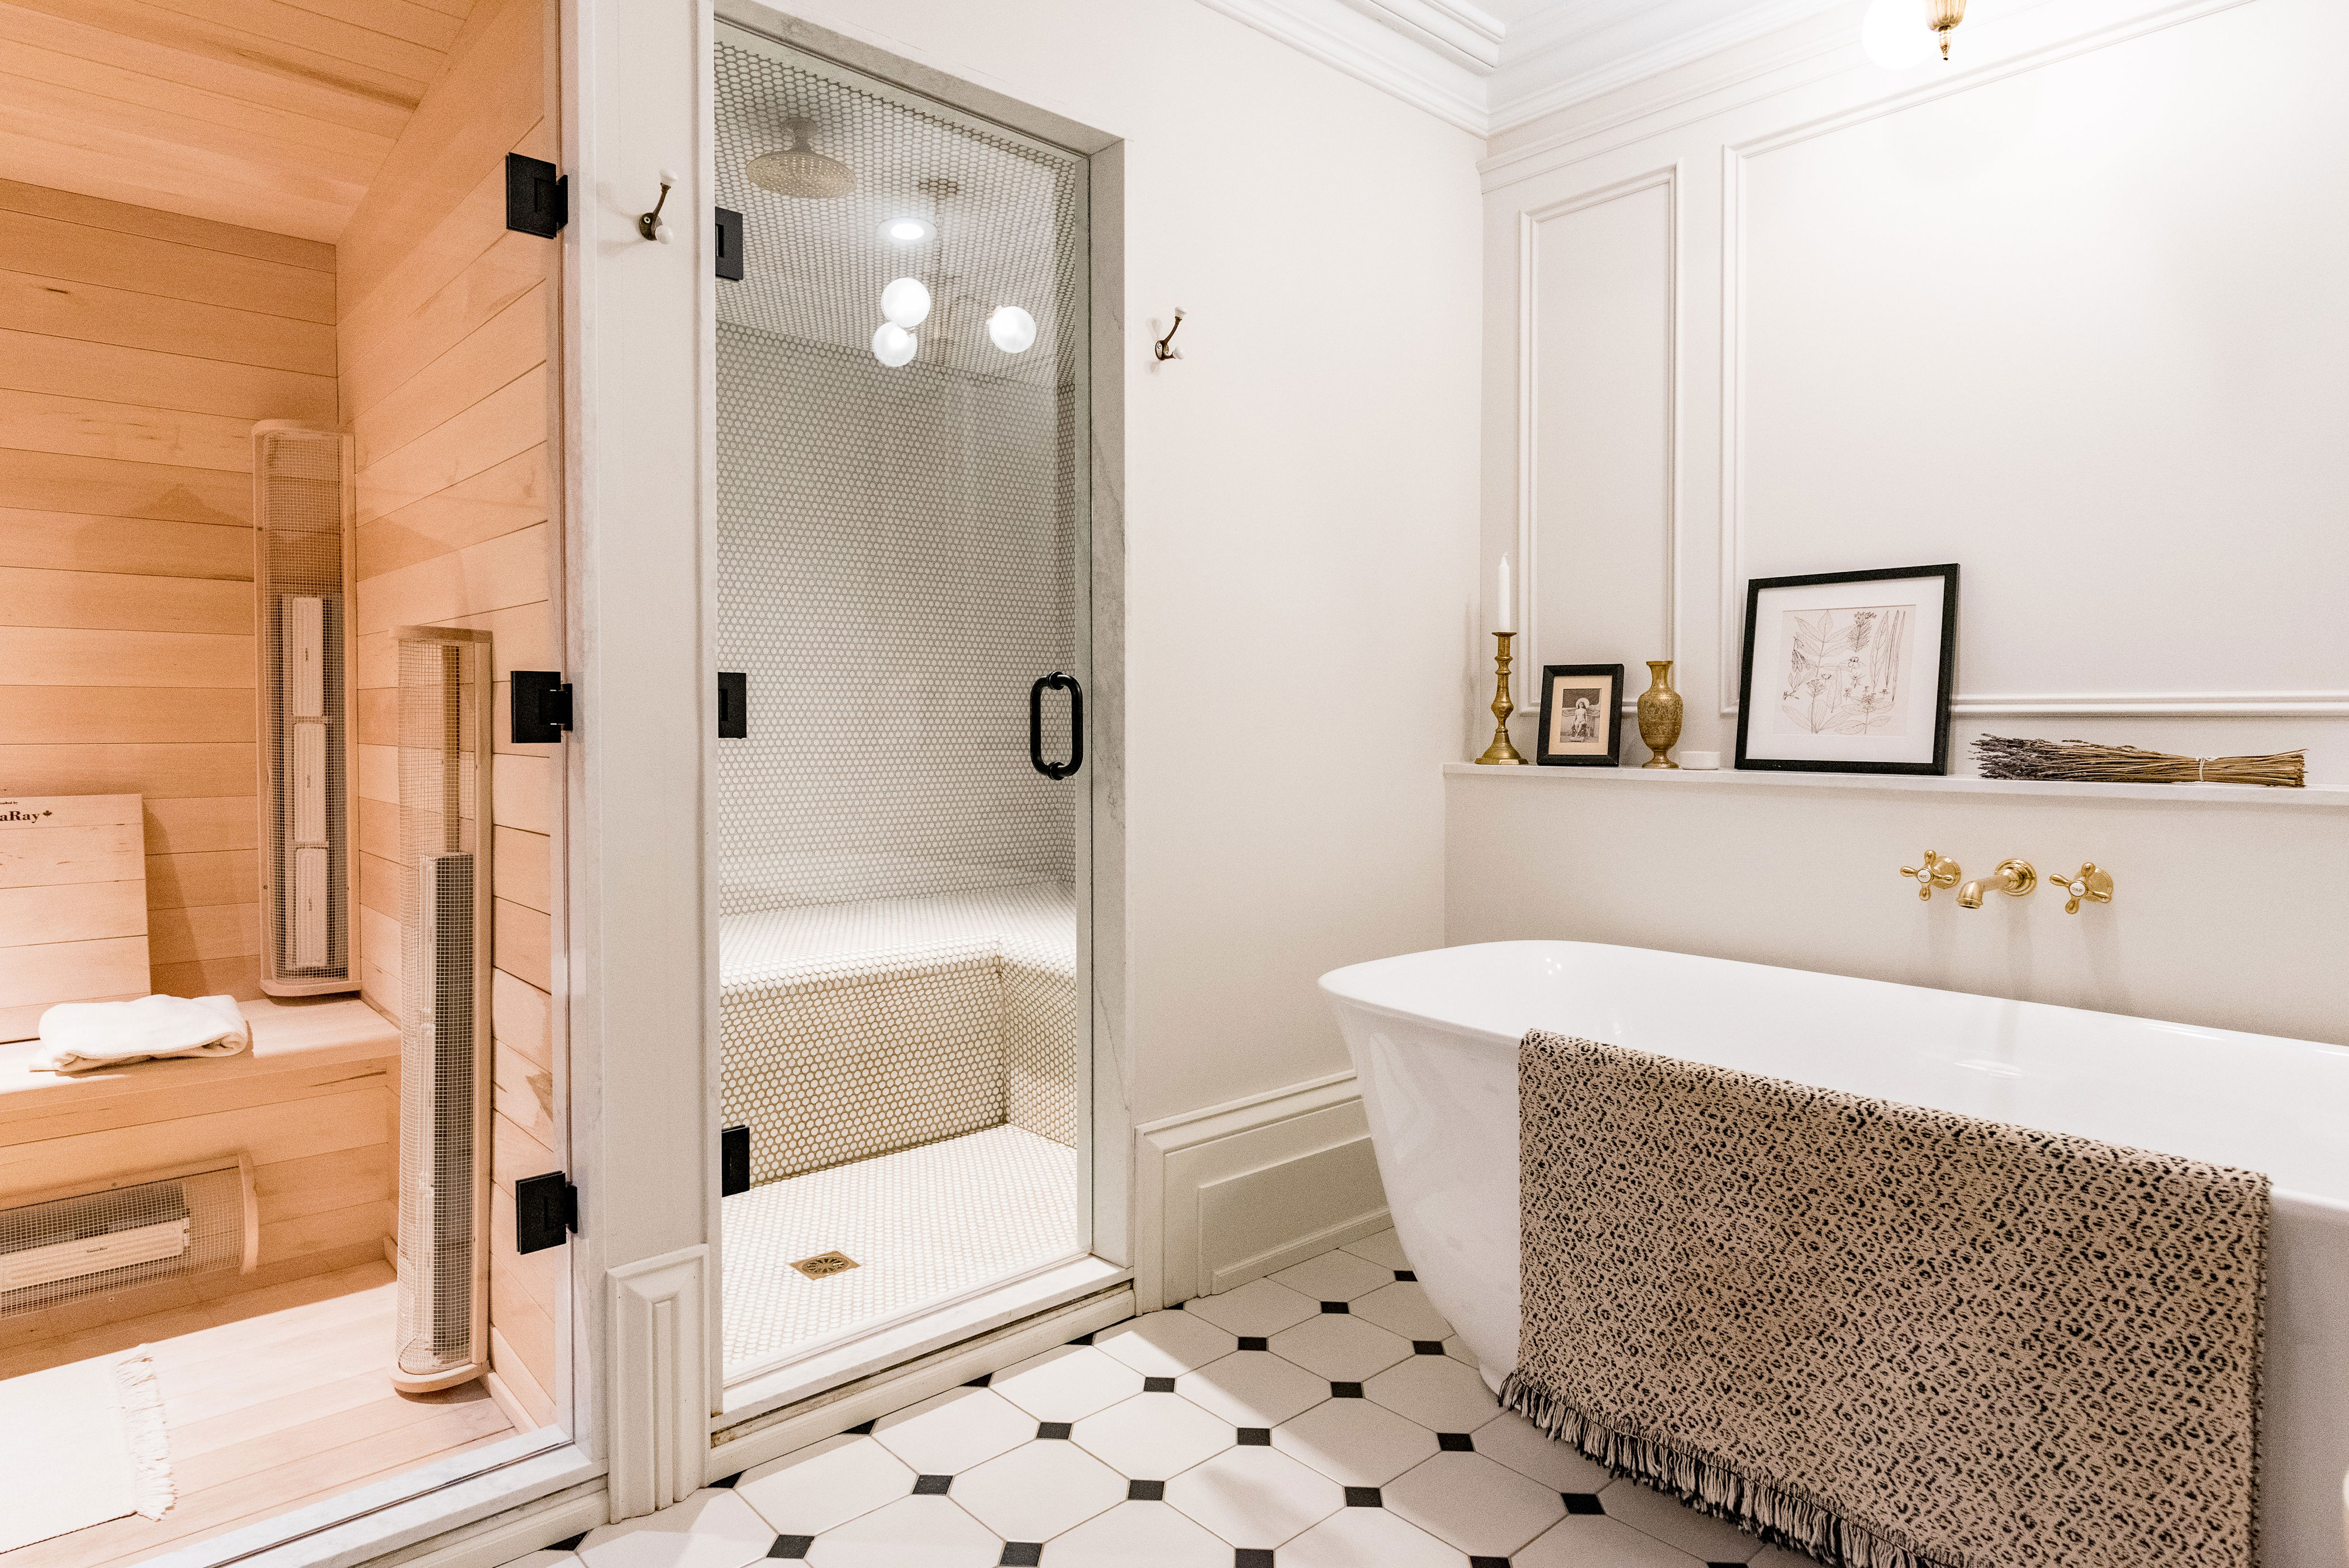 After 20 years of using contrast bathing to relieve muscle tension as a dancer at the National Ballet of Canada, Brett van Sickle was inspired to create a wellness boutique inn with in-room spas. Each of <a href="https://www.thehighacre.com/">the High Acre’</a>s four guest rooms has its own infrared sauna, hammam, and large soaker tubs for ice baths. Rooms also come with a massage gun, essential oil diffuser, LED face mask, and private meditations recorded by Sickle’s partner, a meditation teacher, for a complete self-catered spa experience.<p>Sign up for our newsletter to get the latest in design, decorating, celebrity style, shopping, and more.</p><a href="https://www.architecturaldigest.com/newsletter/subscribe?sourceCode=msnsend">Sign Up Now</a>